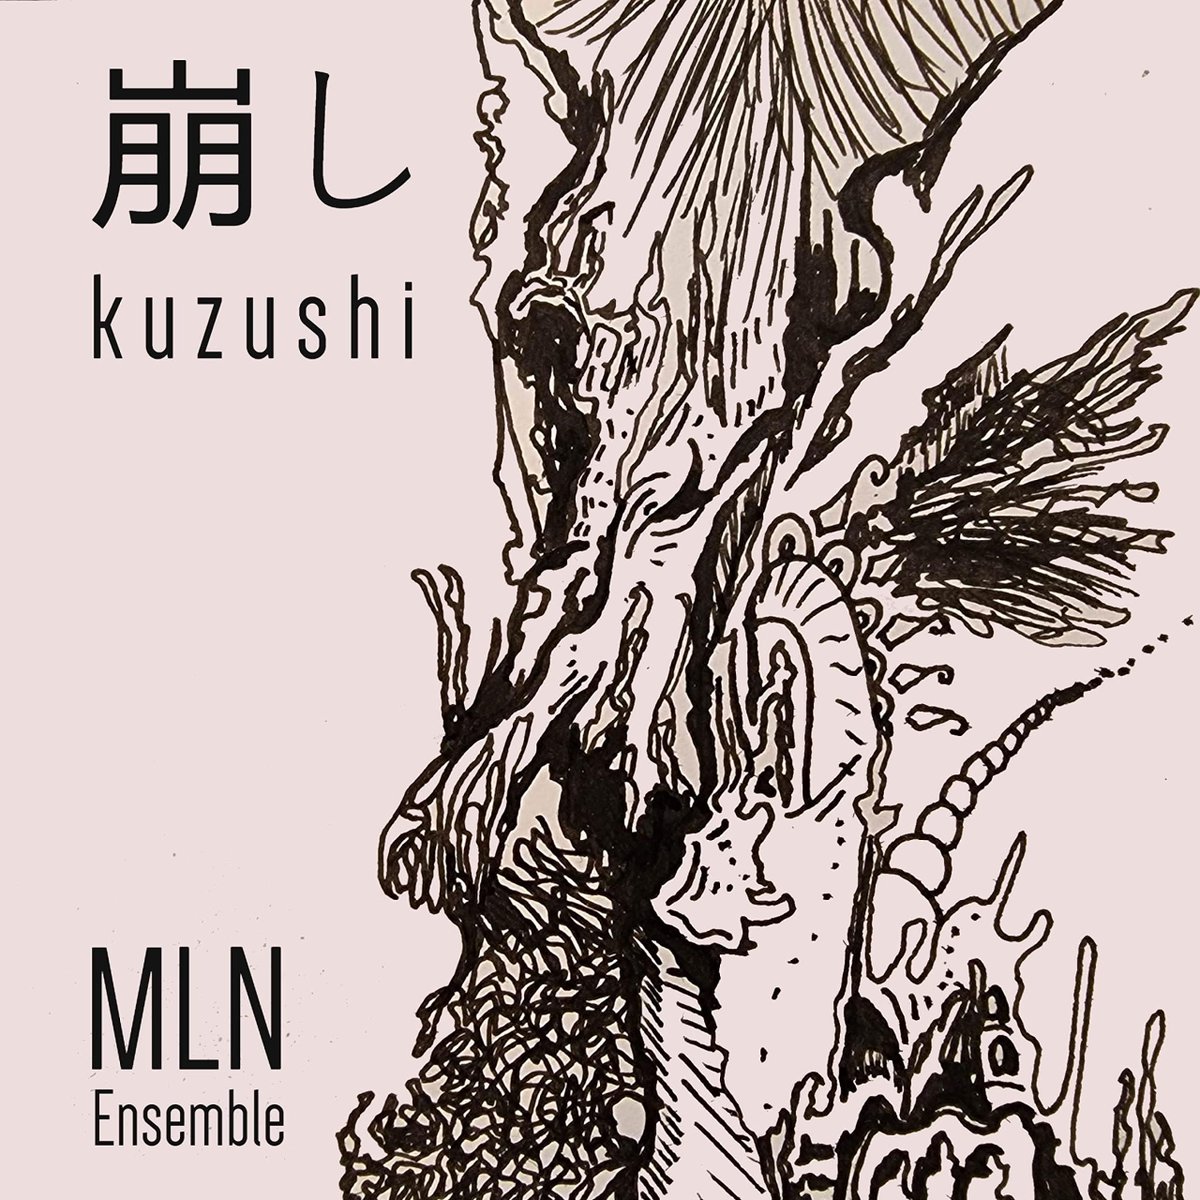 Kuzushi ft. Laurie Lowe by MLN Ensemble now playing on Latest releases @officialjazzlon